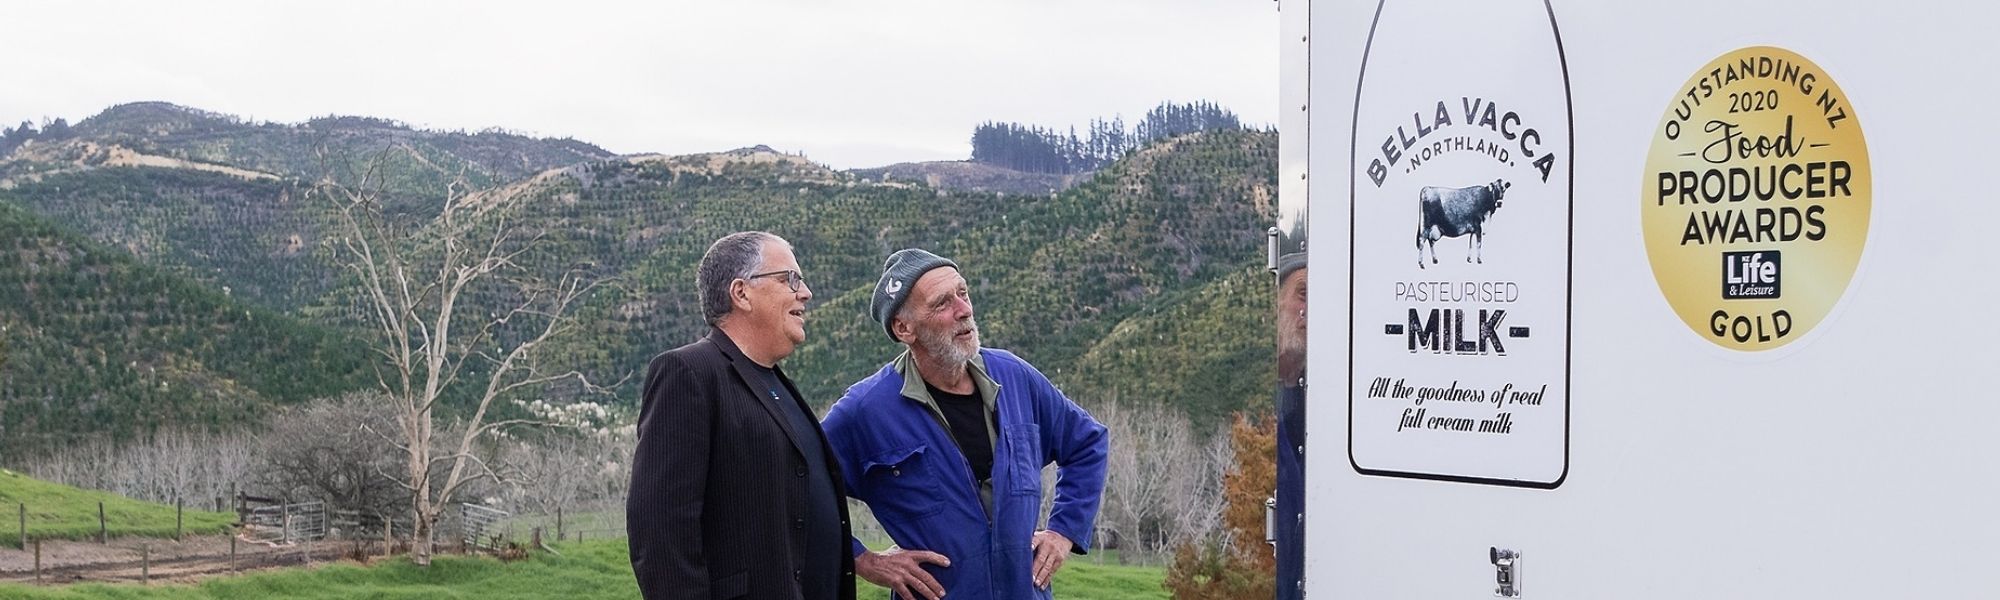 Two men talking in a paddock with tree-planted hills in the background. 